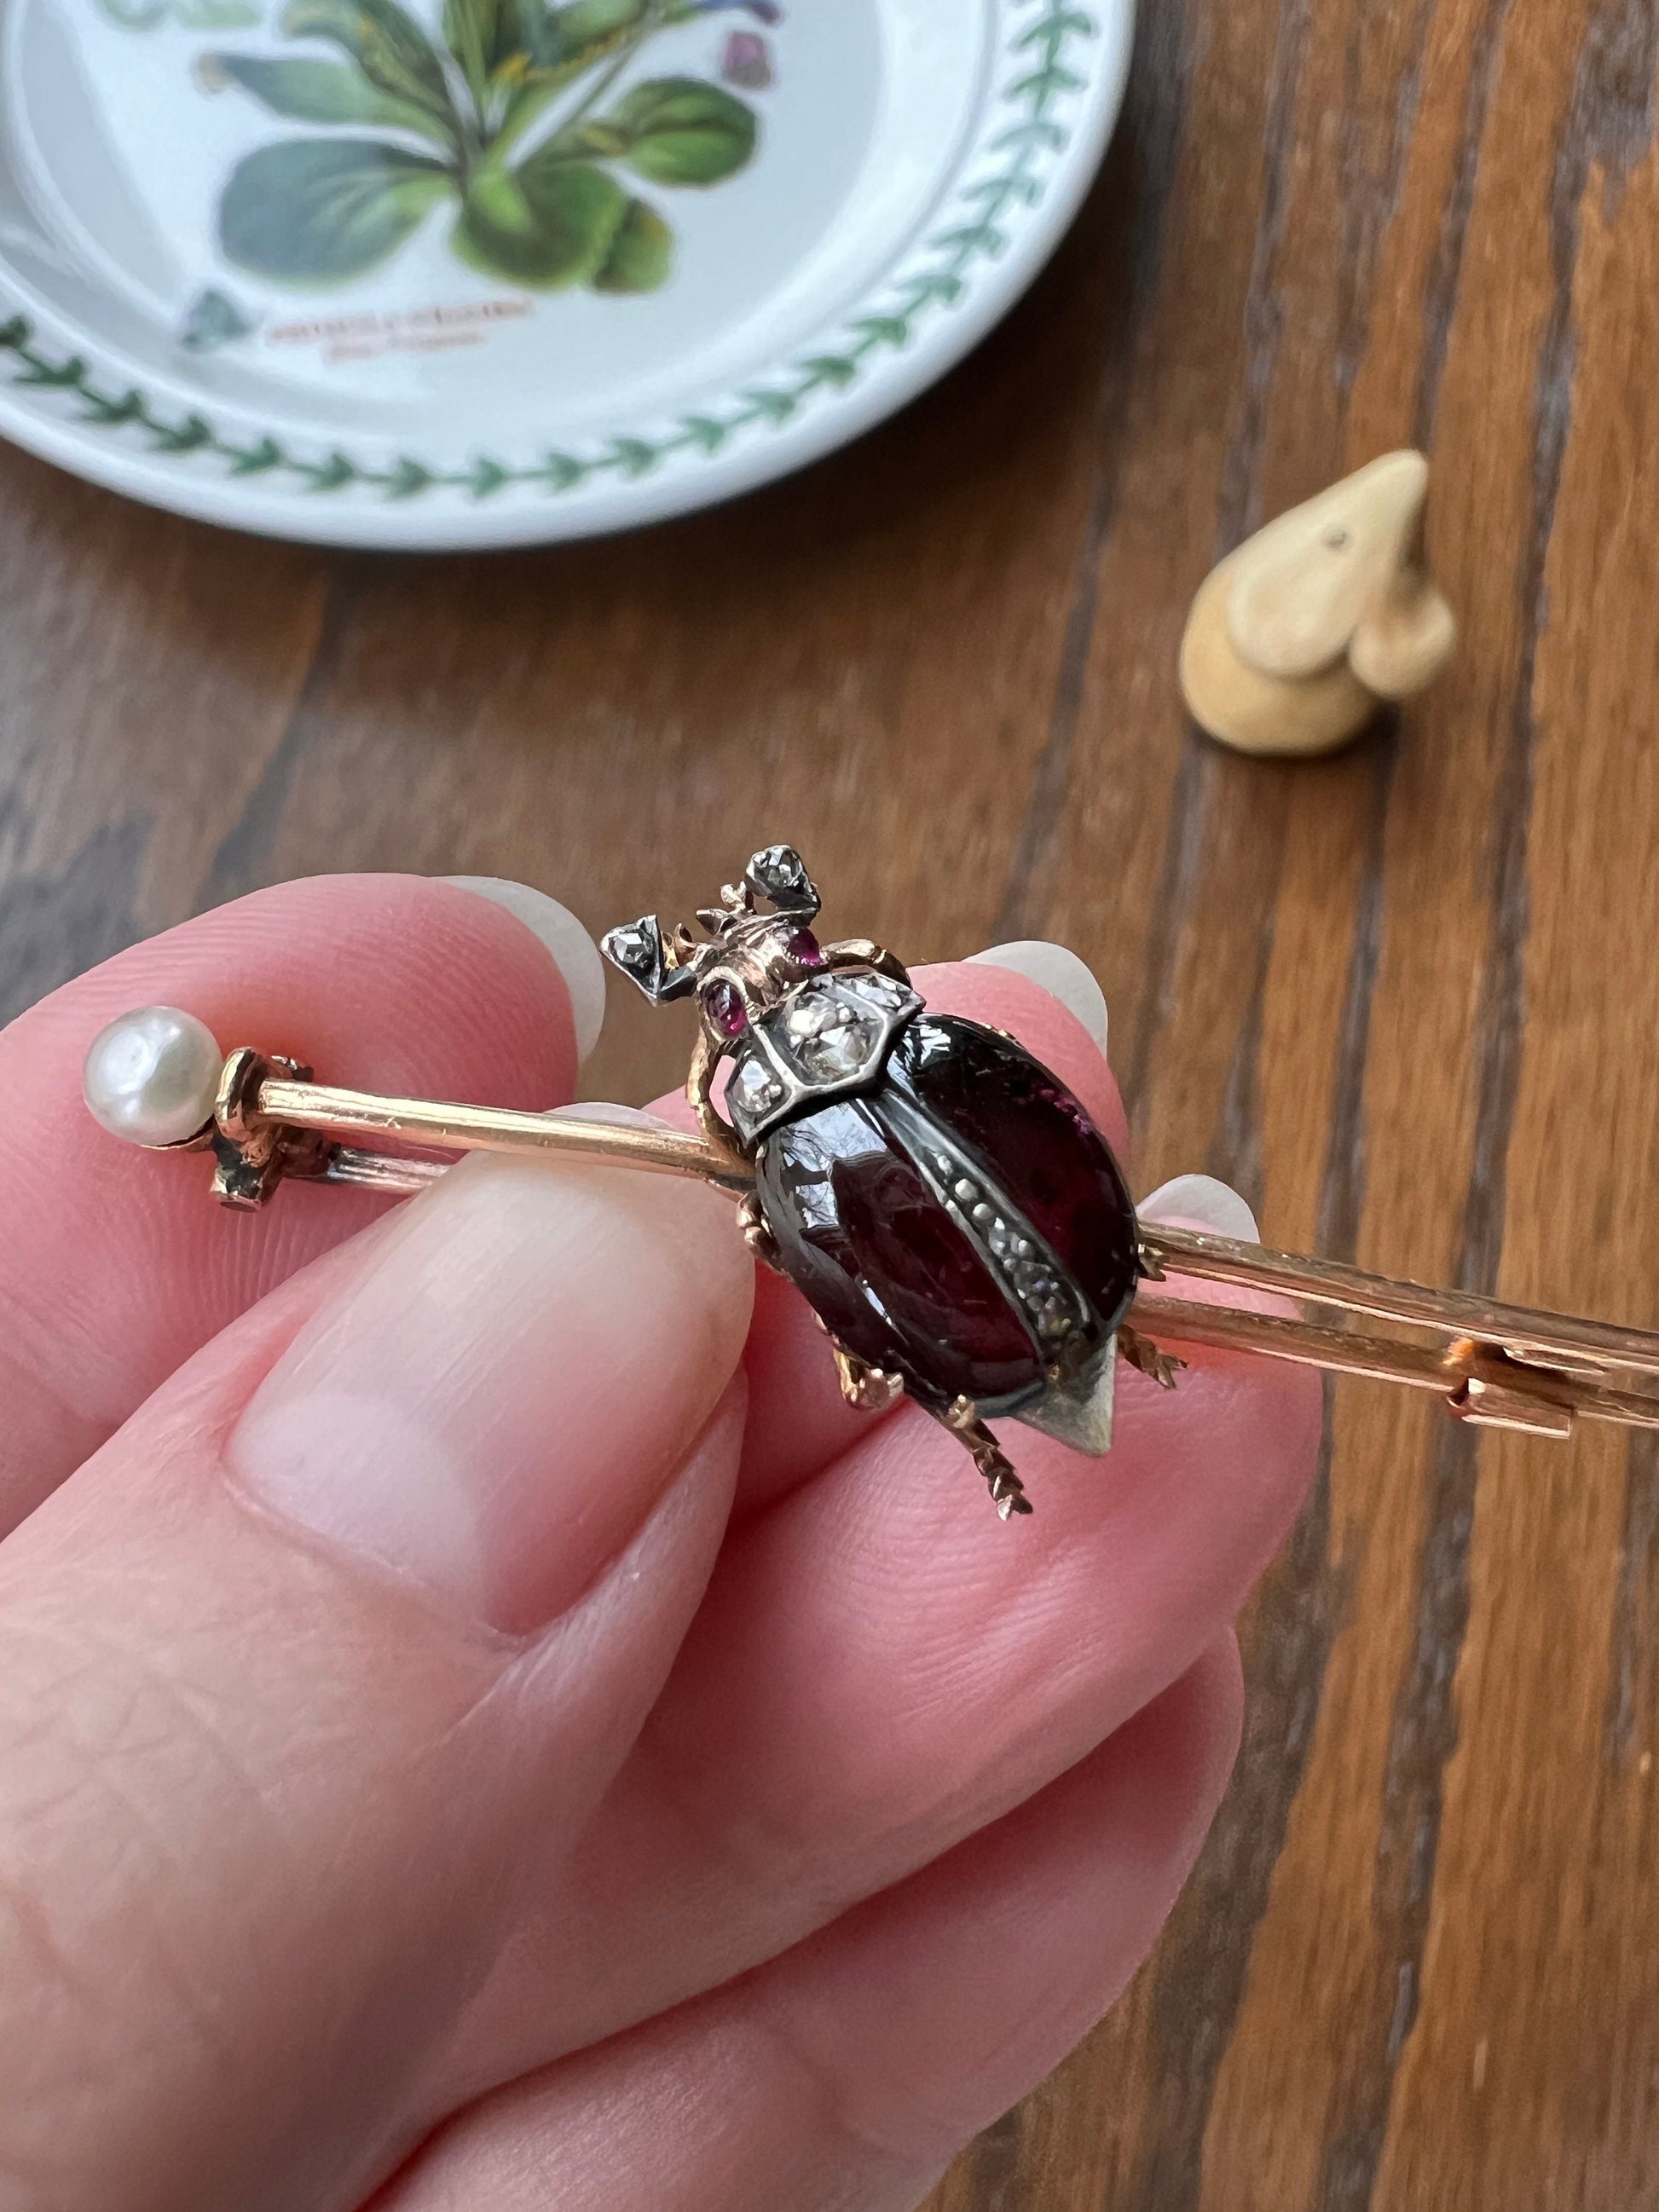 BUG Beetle GARNET Wing Rose Cut Diamond French Antique Victorian Figural Pin Brooch for Pendant 18k Gold Gift Red Carbuncle Scarab Connector